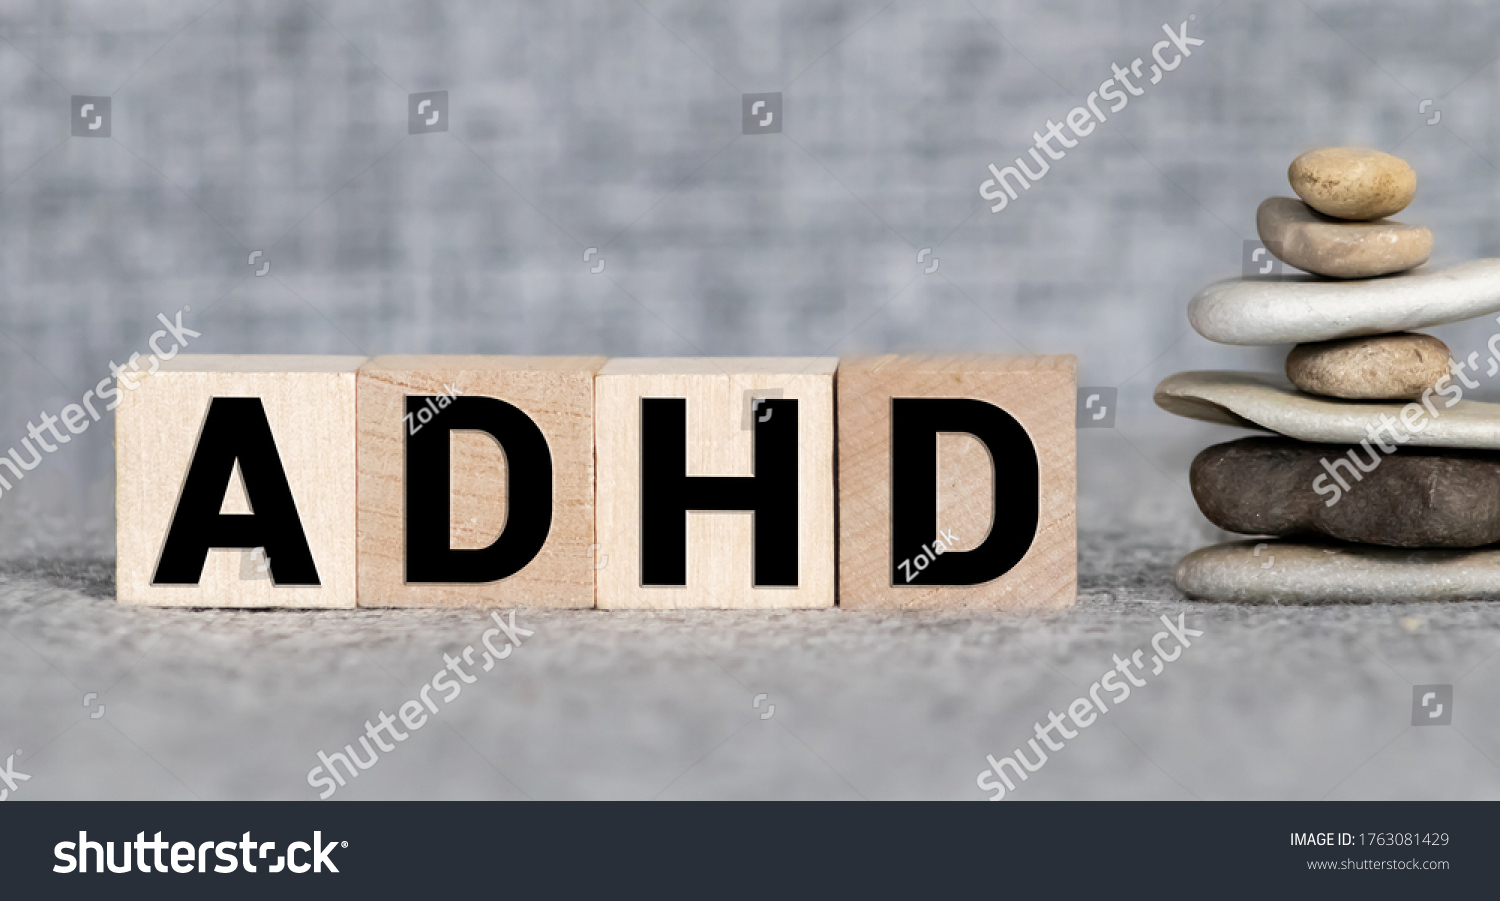 ADHD abbreviation on wooden blocks. ADHD is Attention deficit hyperactivity disorder. Close up. Vignette. #1763081429